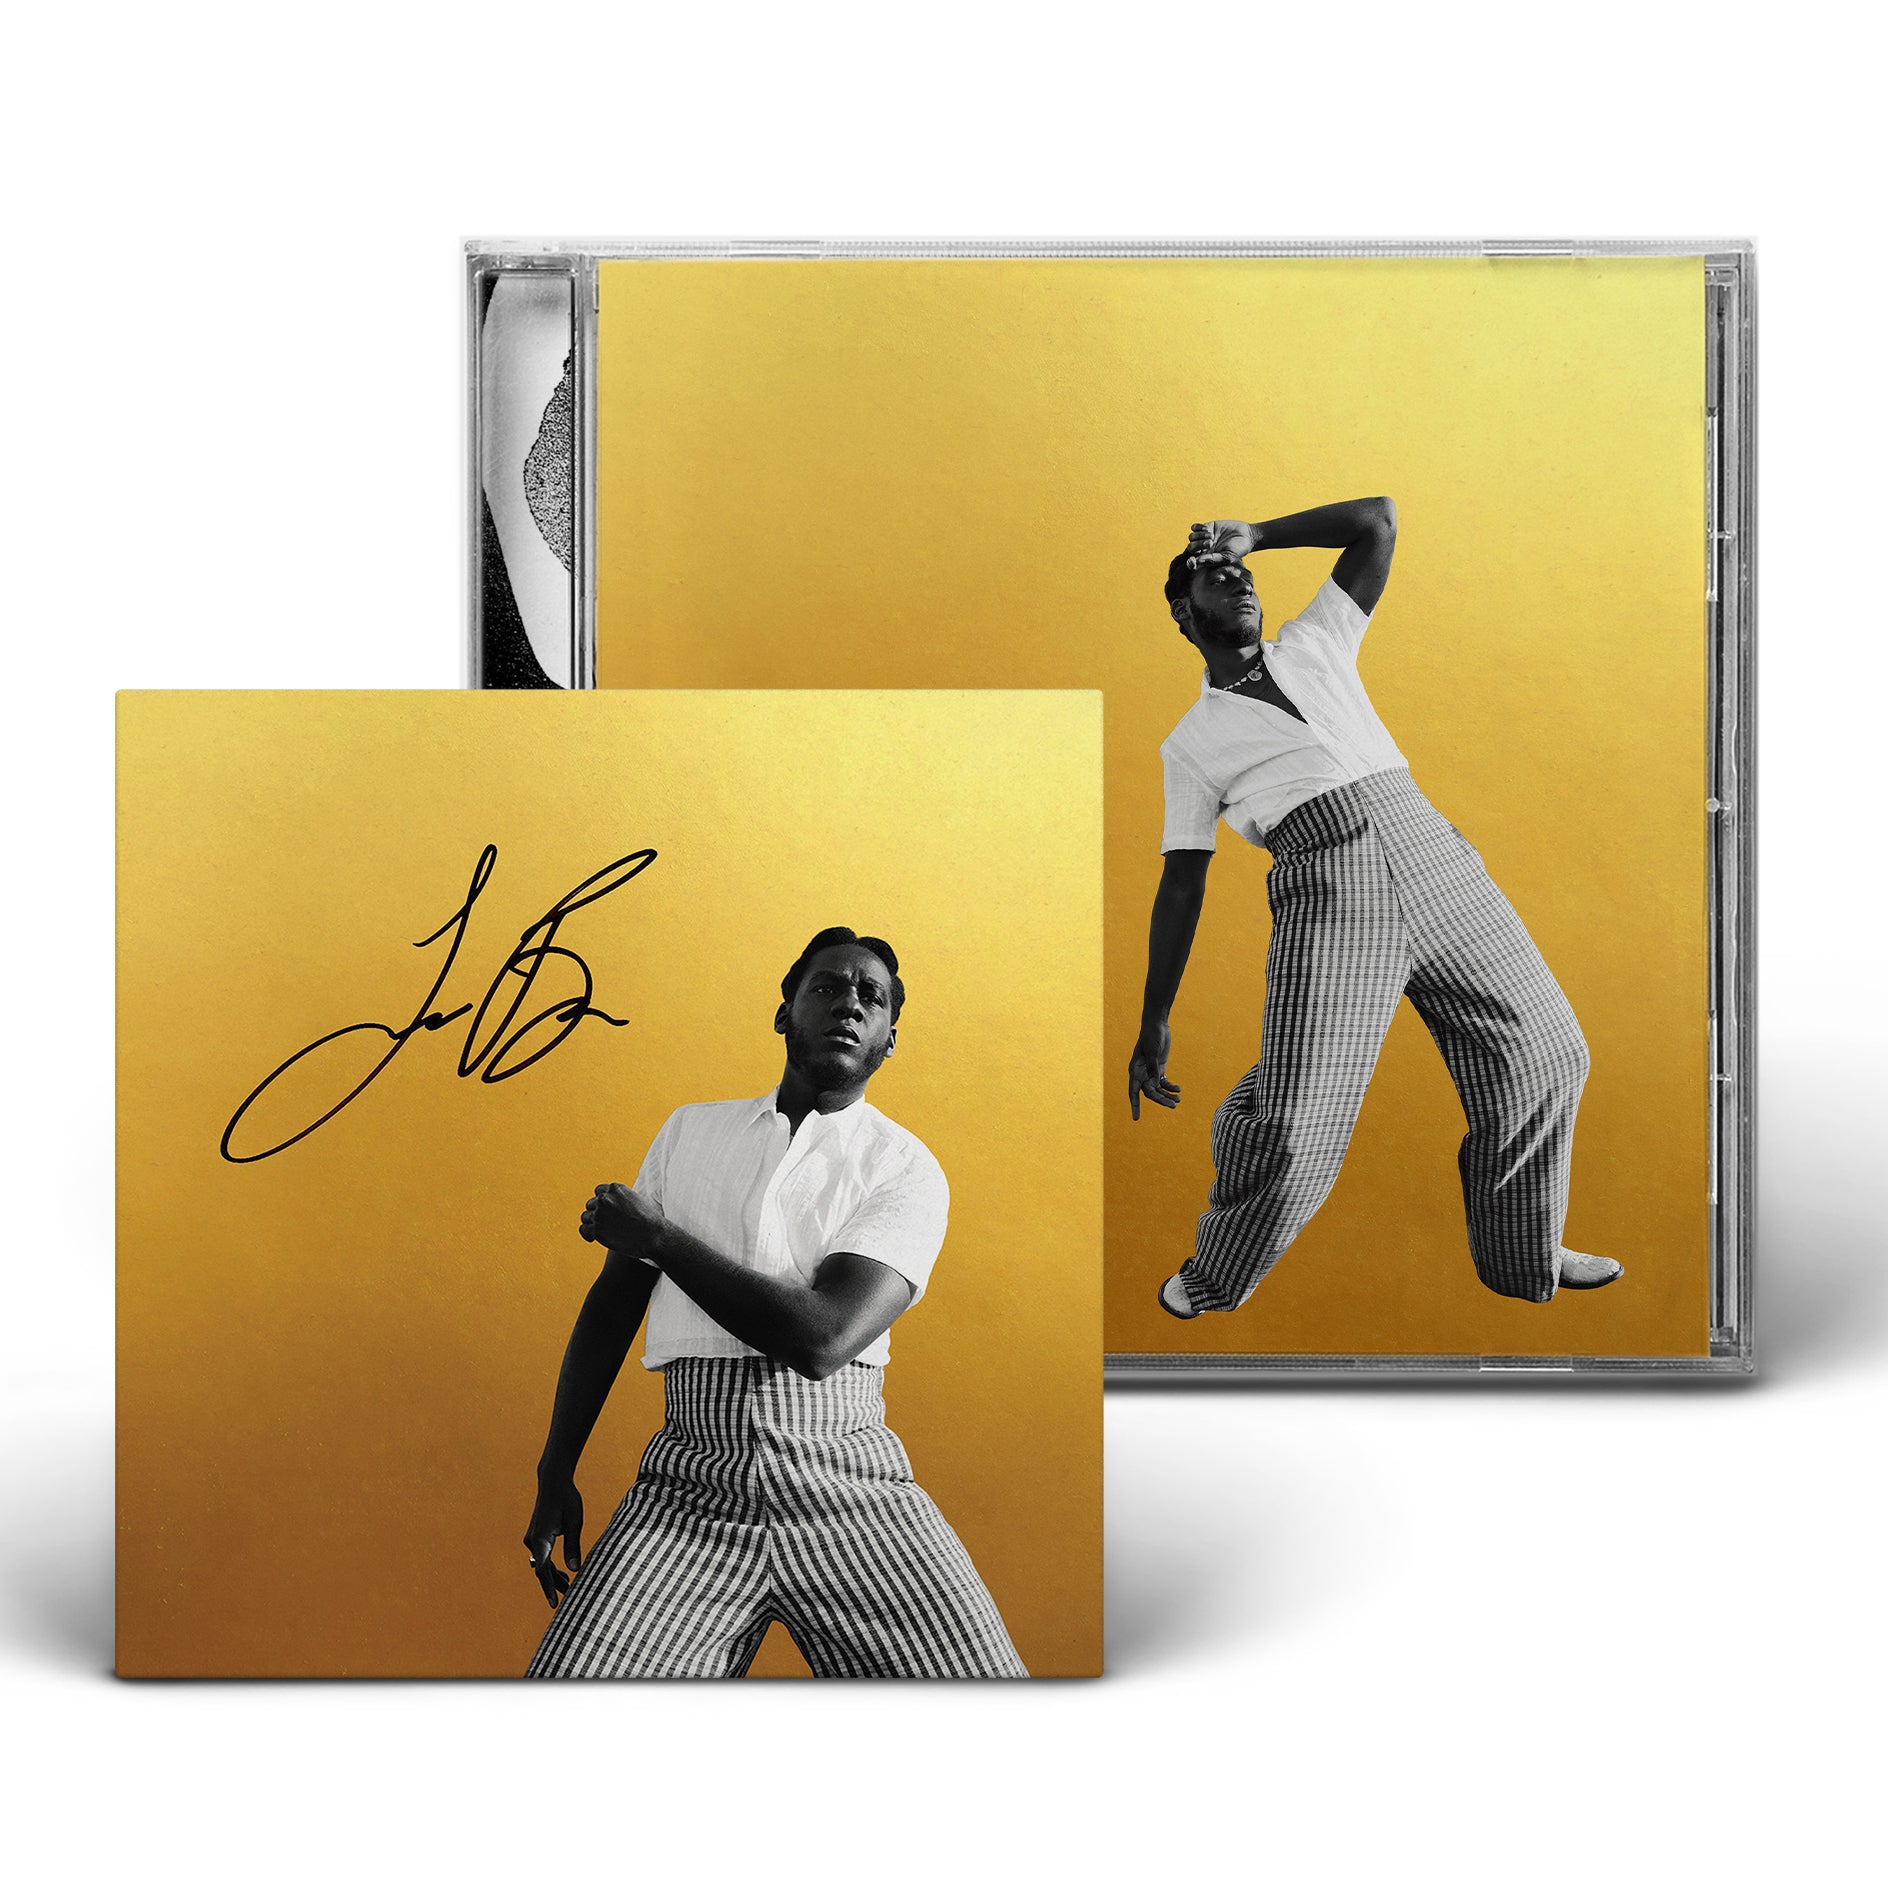 EXCLUSIVE *LIMITED EDITION* Leon Bridges Official Store AUTOGRAPHED CD: Single disc in standard Jewel Box, w/ 24 page insert booklet, and a SIGNED 4"x4" INSERT of an alternate album cover photo.